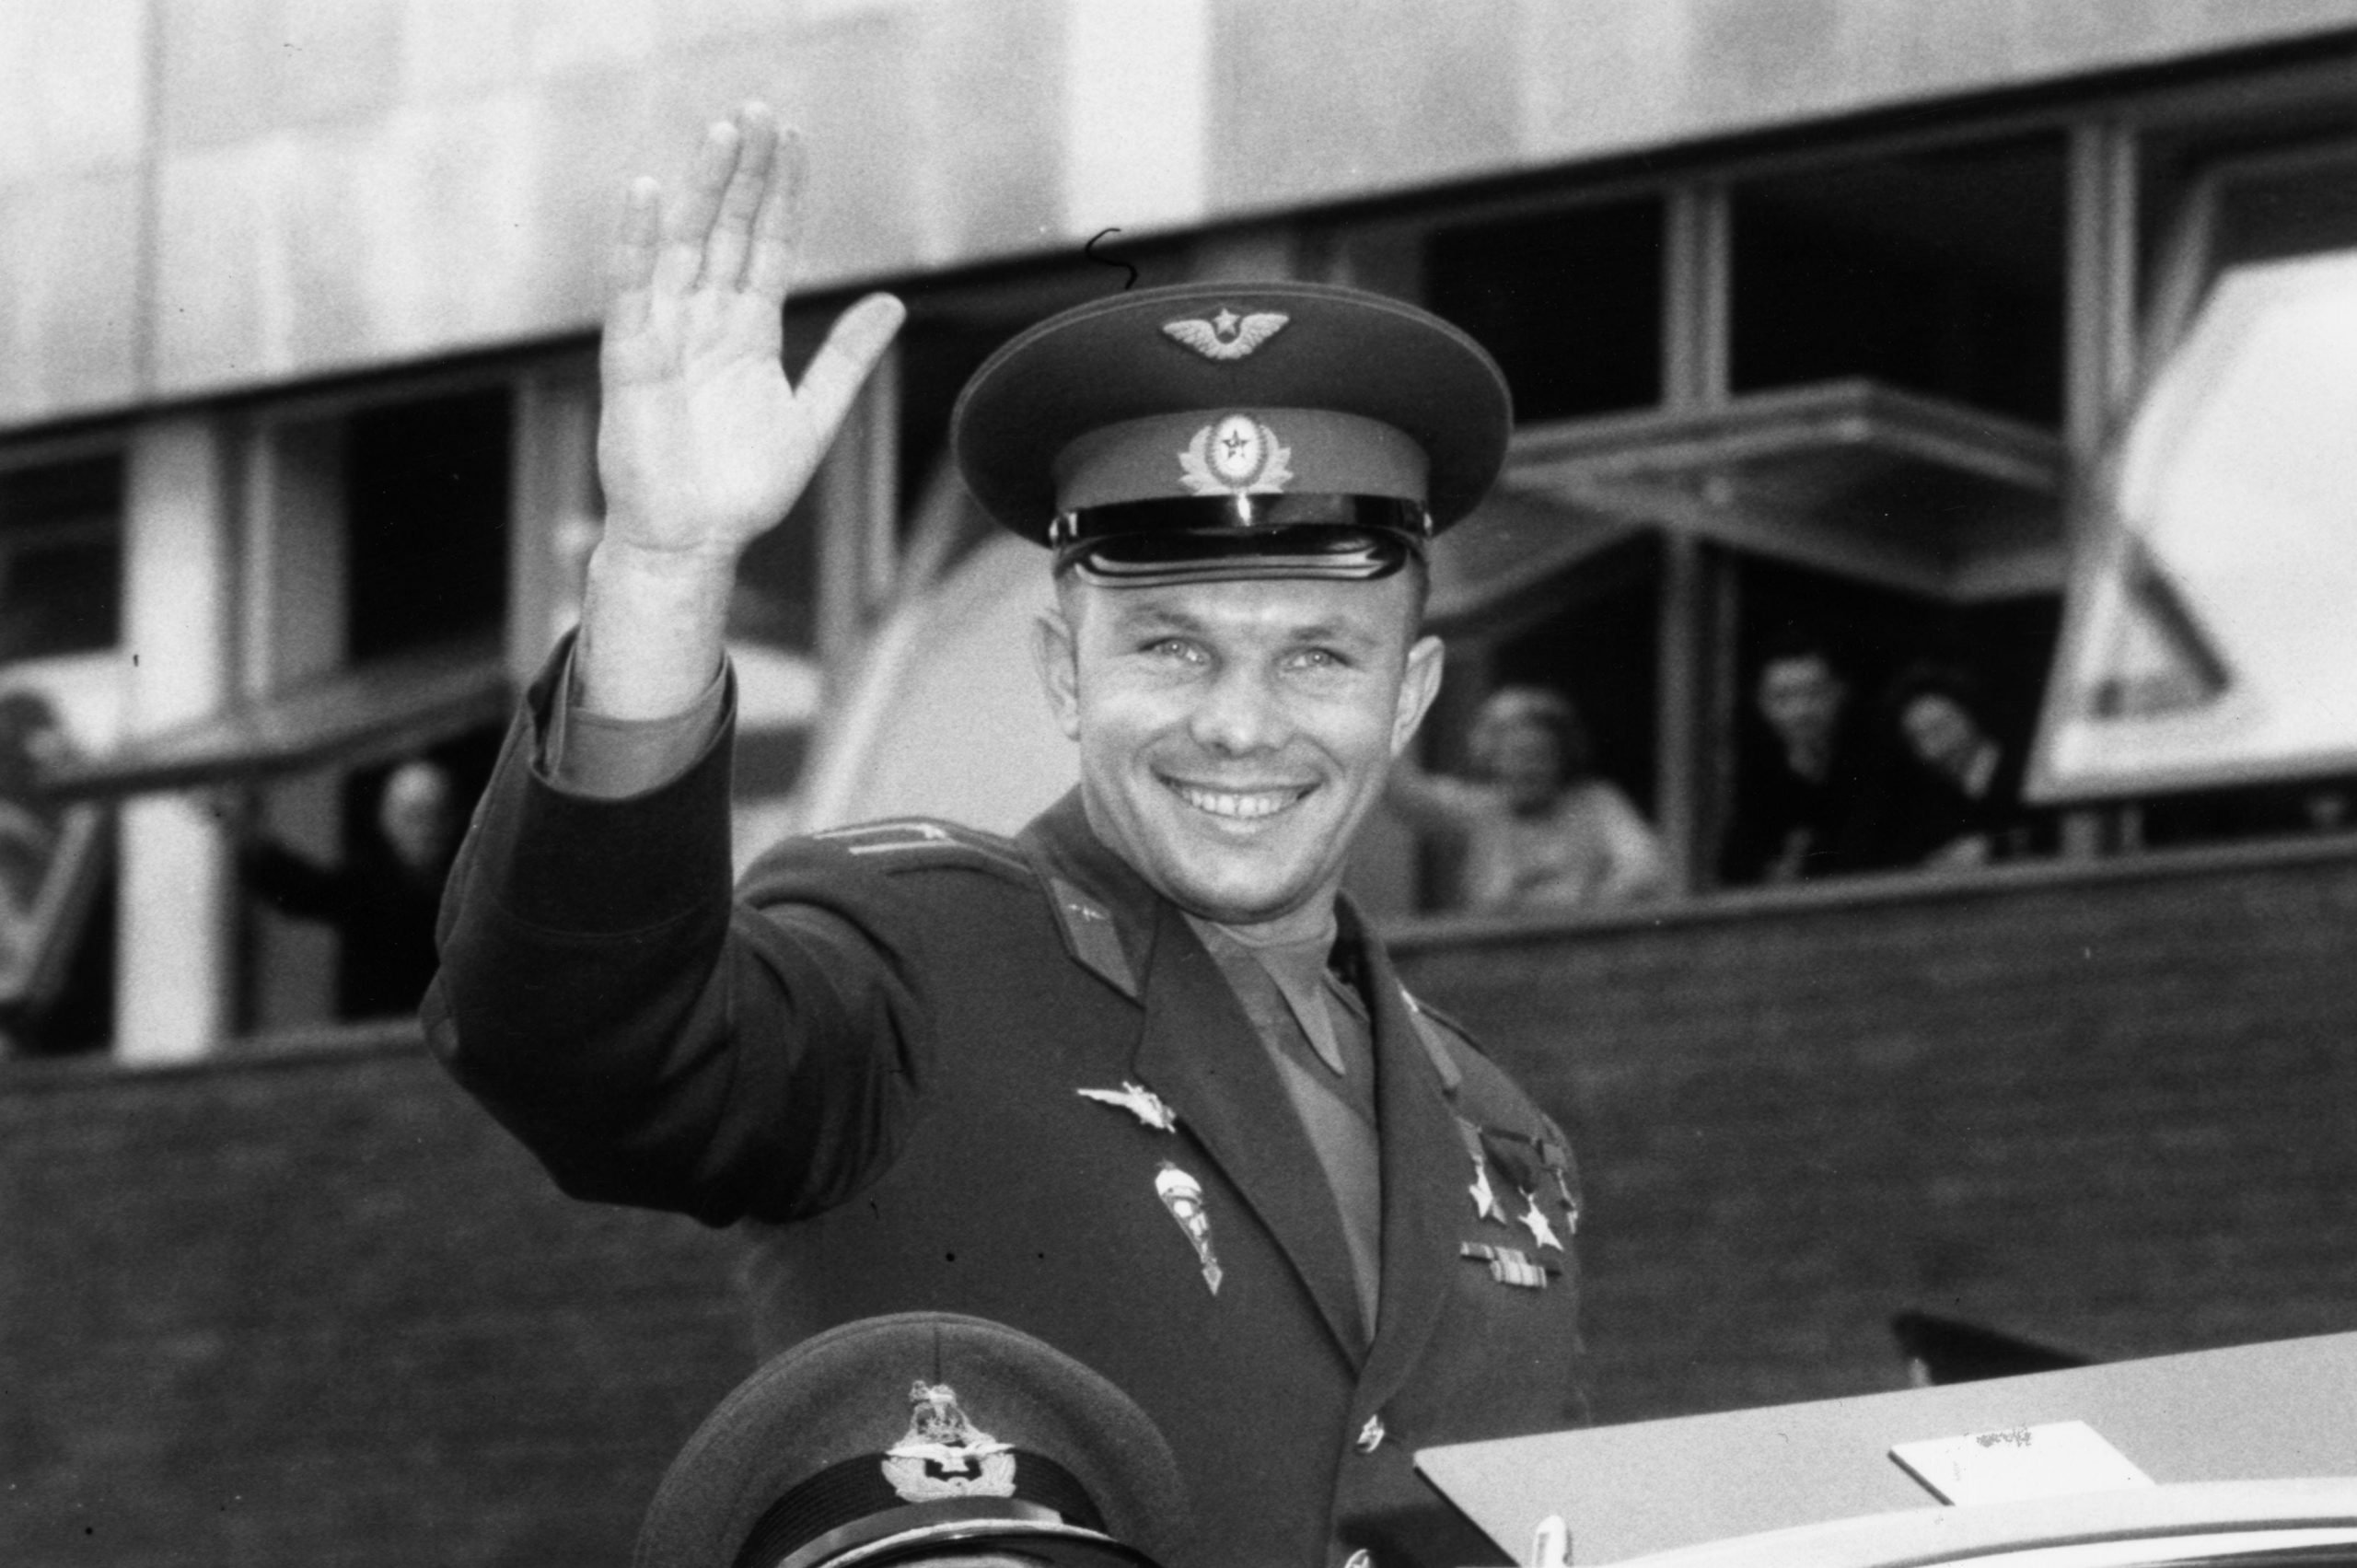 A man in a military uniform waves.